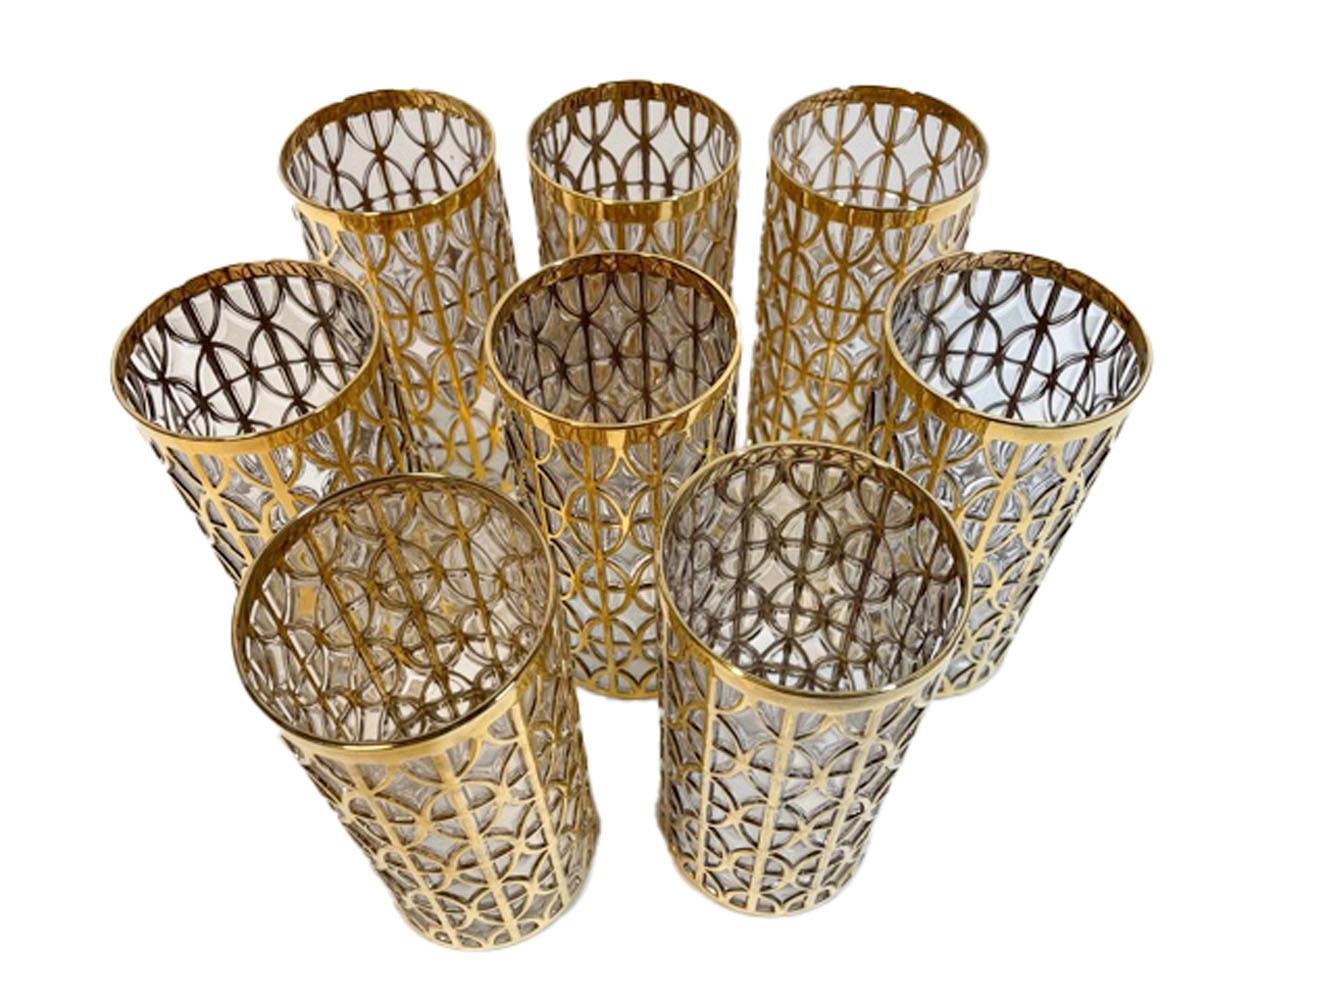 Set of 8 Mid-Century Modern highball glasses made by Imperial Glass Co. in the Tabique de Oro Pattern. Each piece is molded with a raised pattern, the raised areas are then gilded in 22k gold.